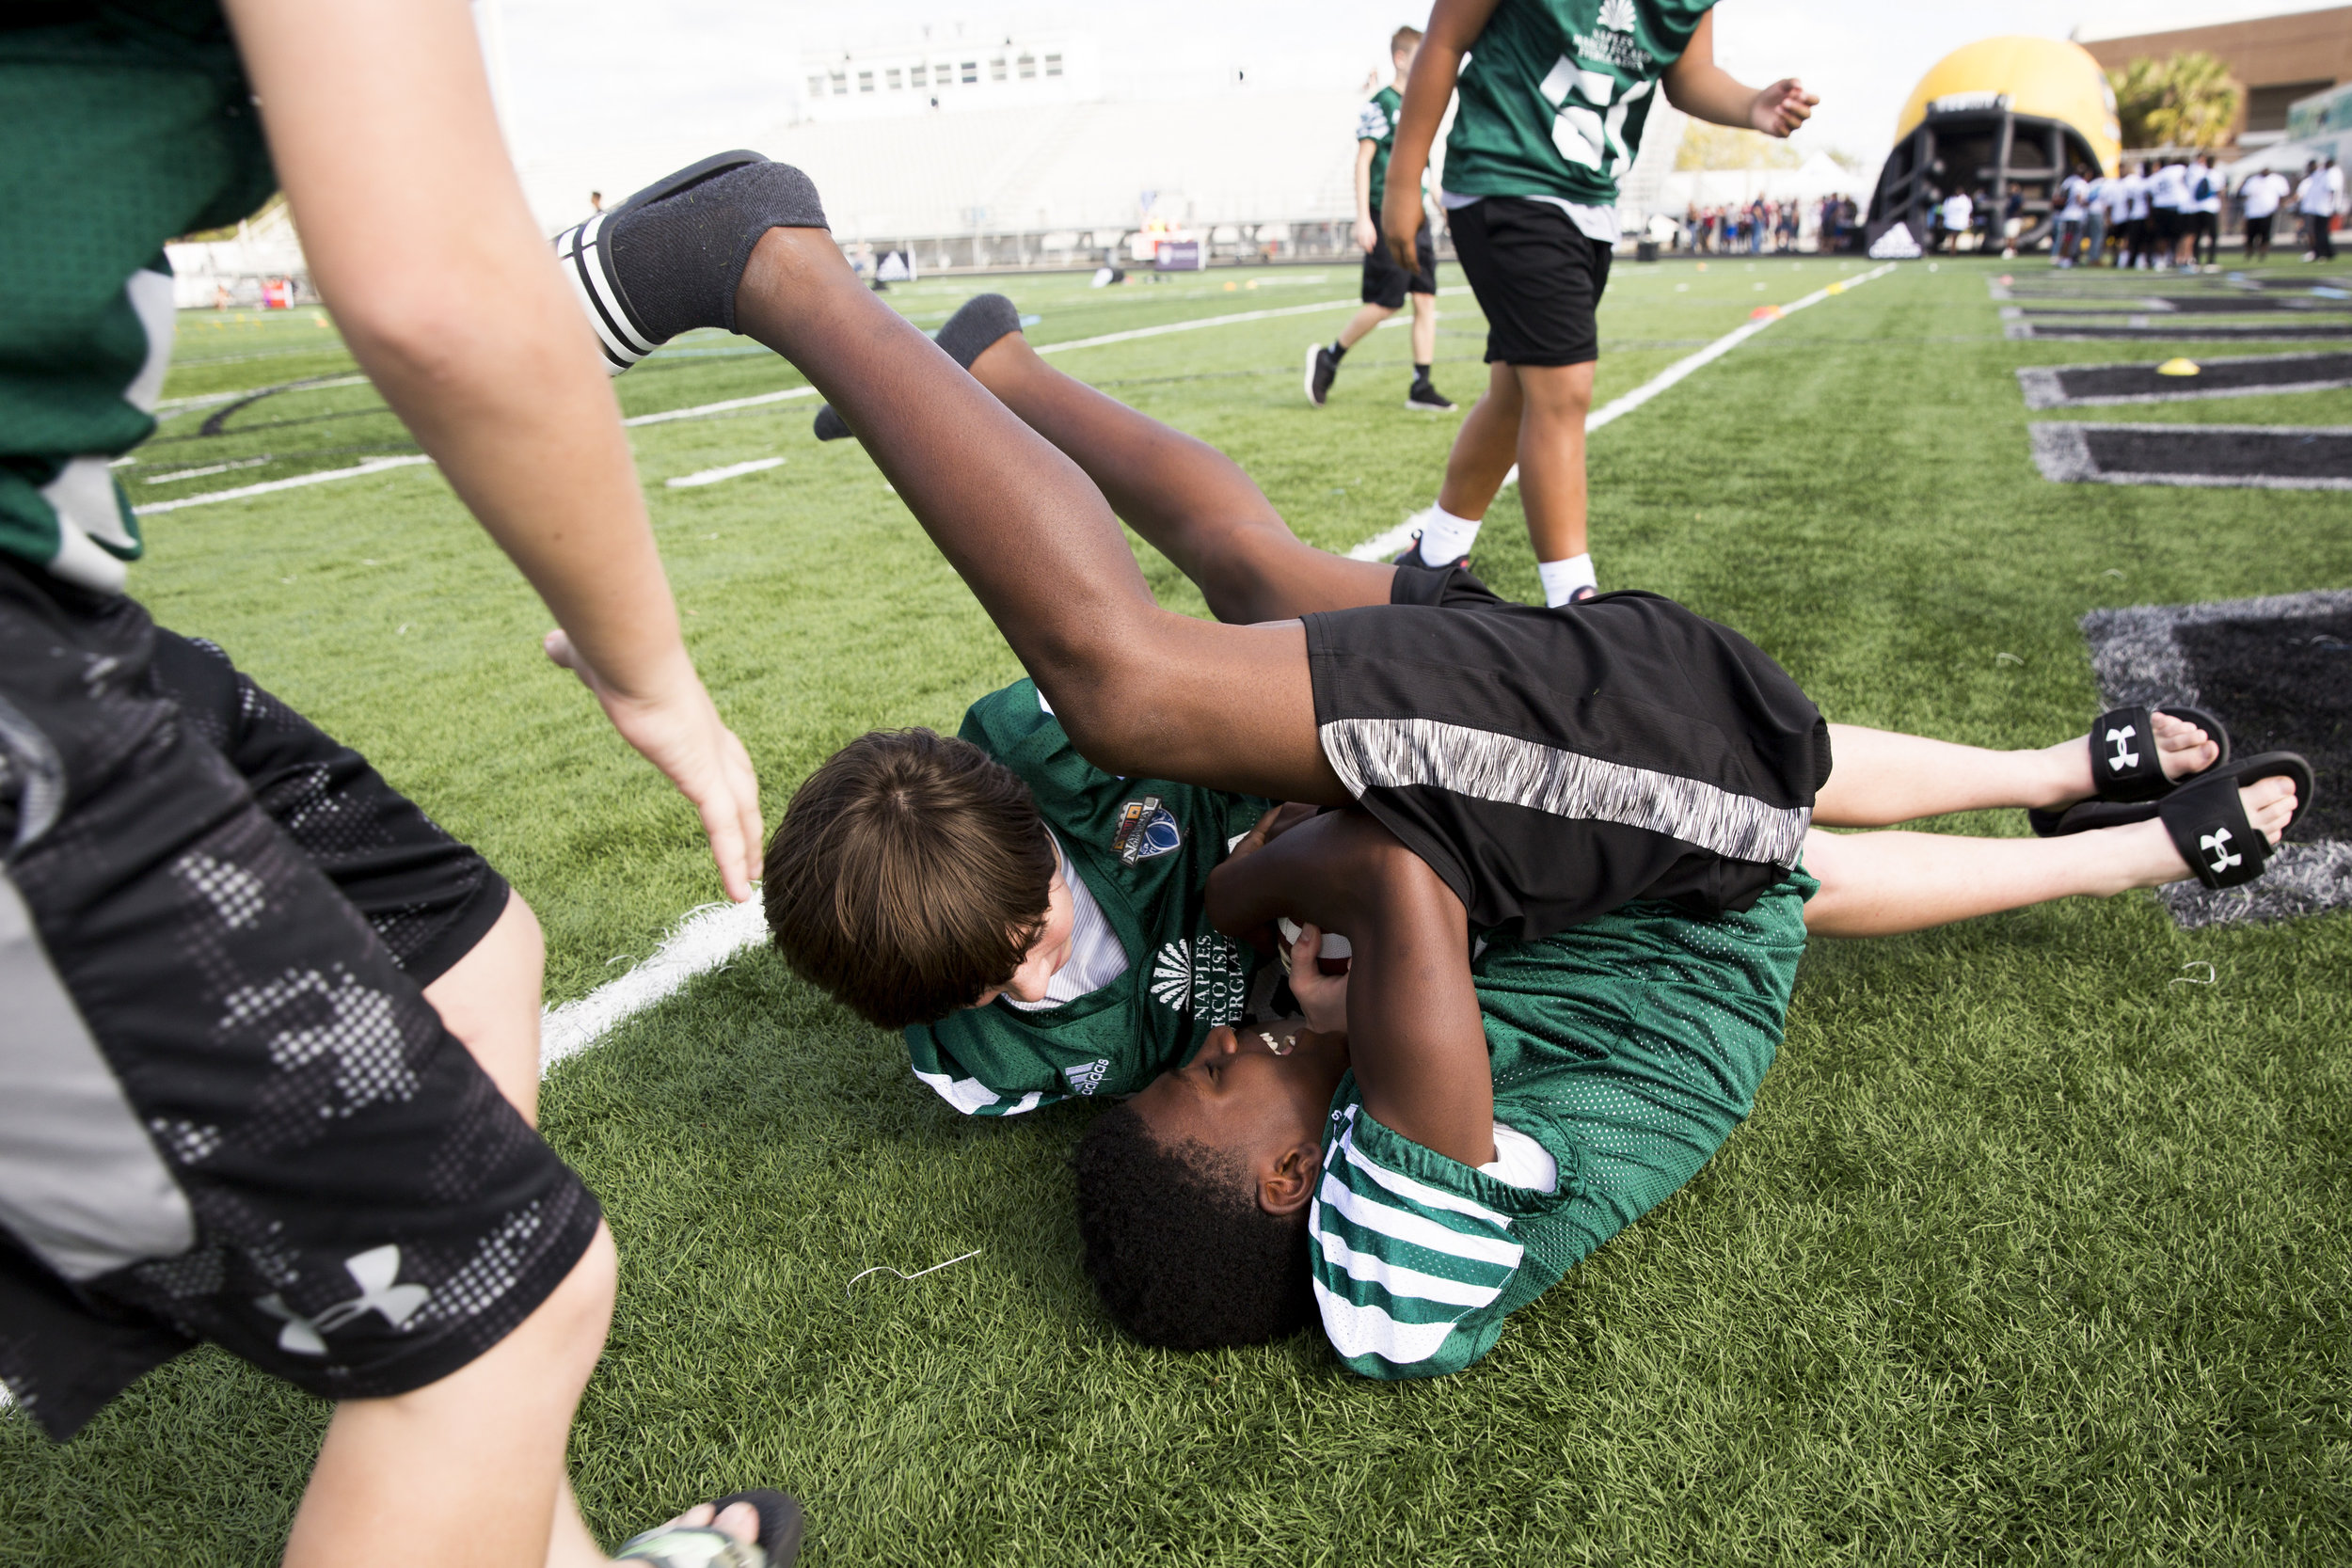  James Johnson, 12, does a somersault while wrestling for the ball with Dane Aaberg, 12, both with the 6th Grade team from Dallas, Texas as middle-school football players from across the country showed up for registration and a pep rally to kick off 